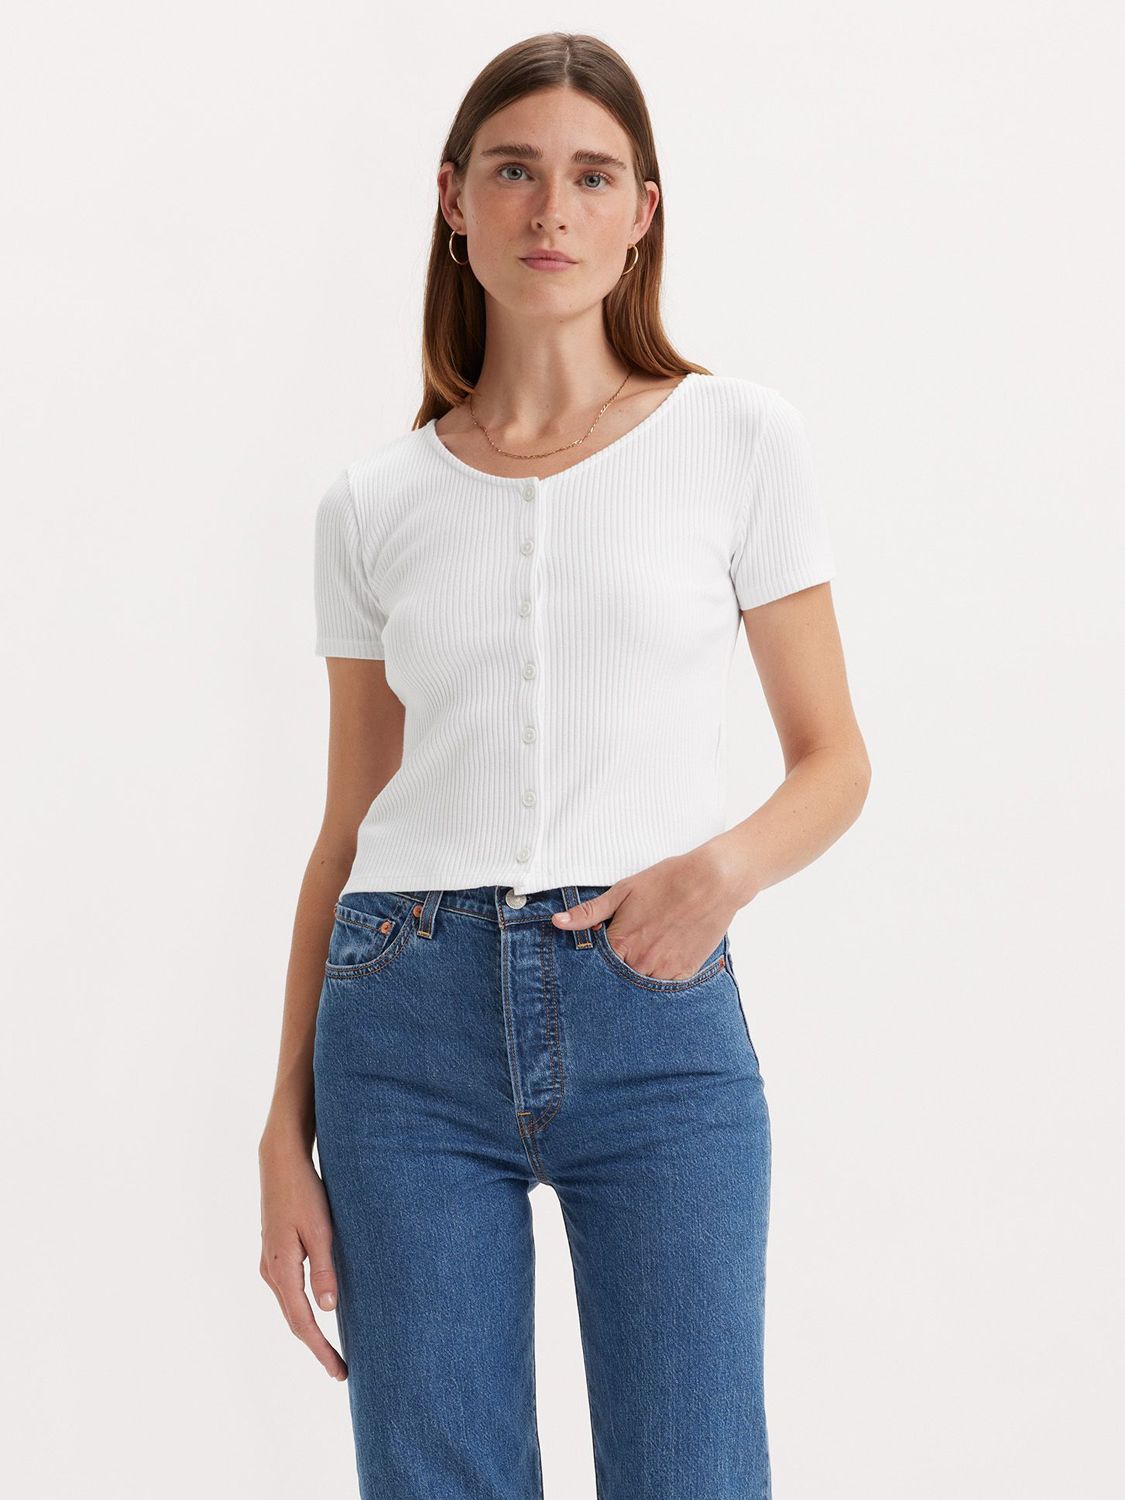 Buy Levi's Monica Button Front Short Sleeve Top Online at johnlewis.com